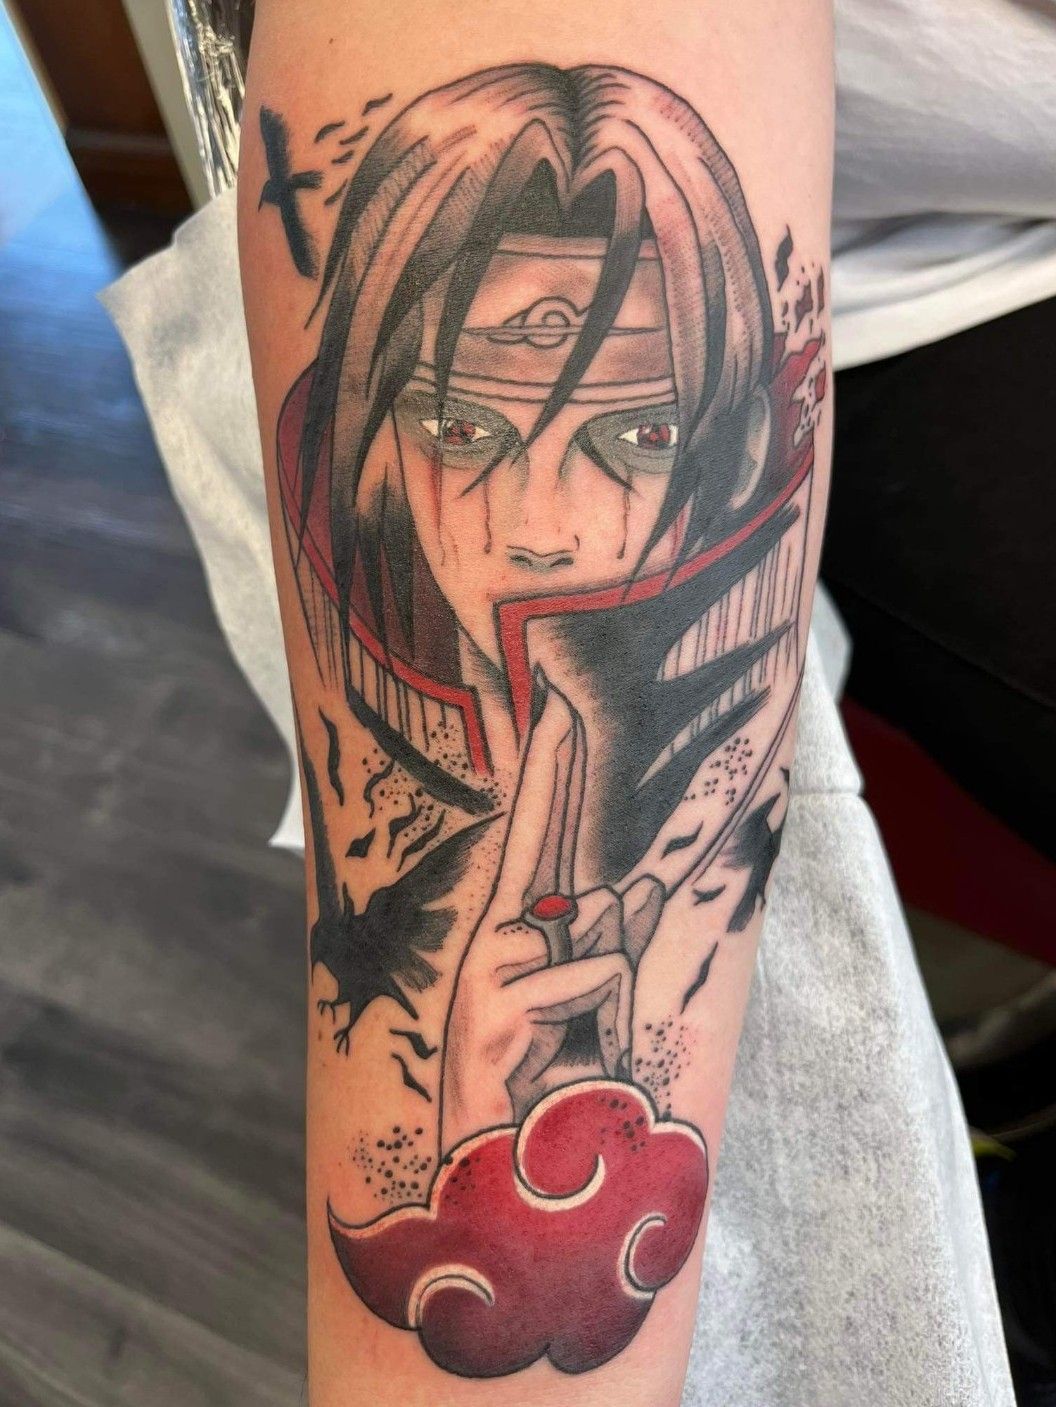 My first tattoo had to be a Team 7 tattoo This show really means so much  to me  rNaruto